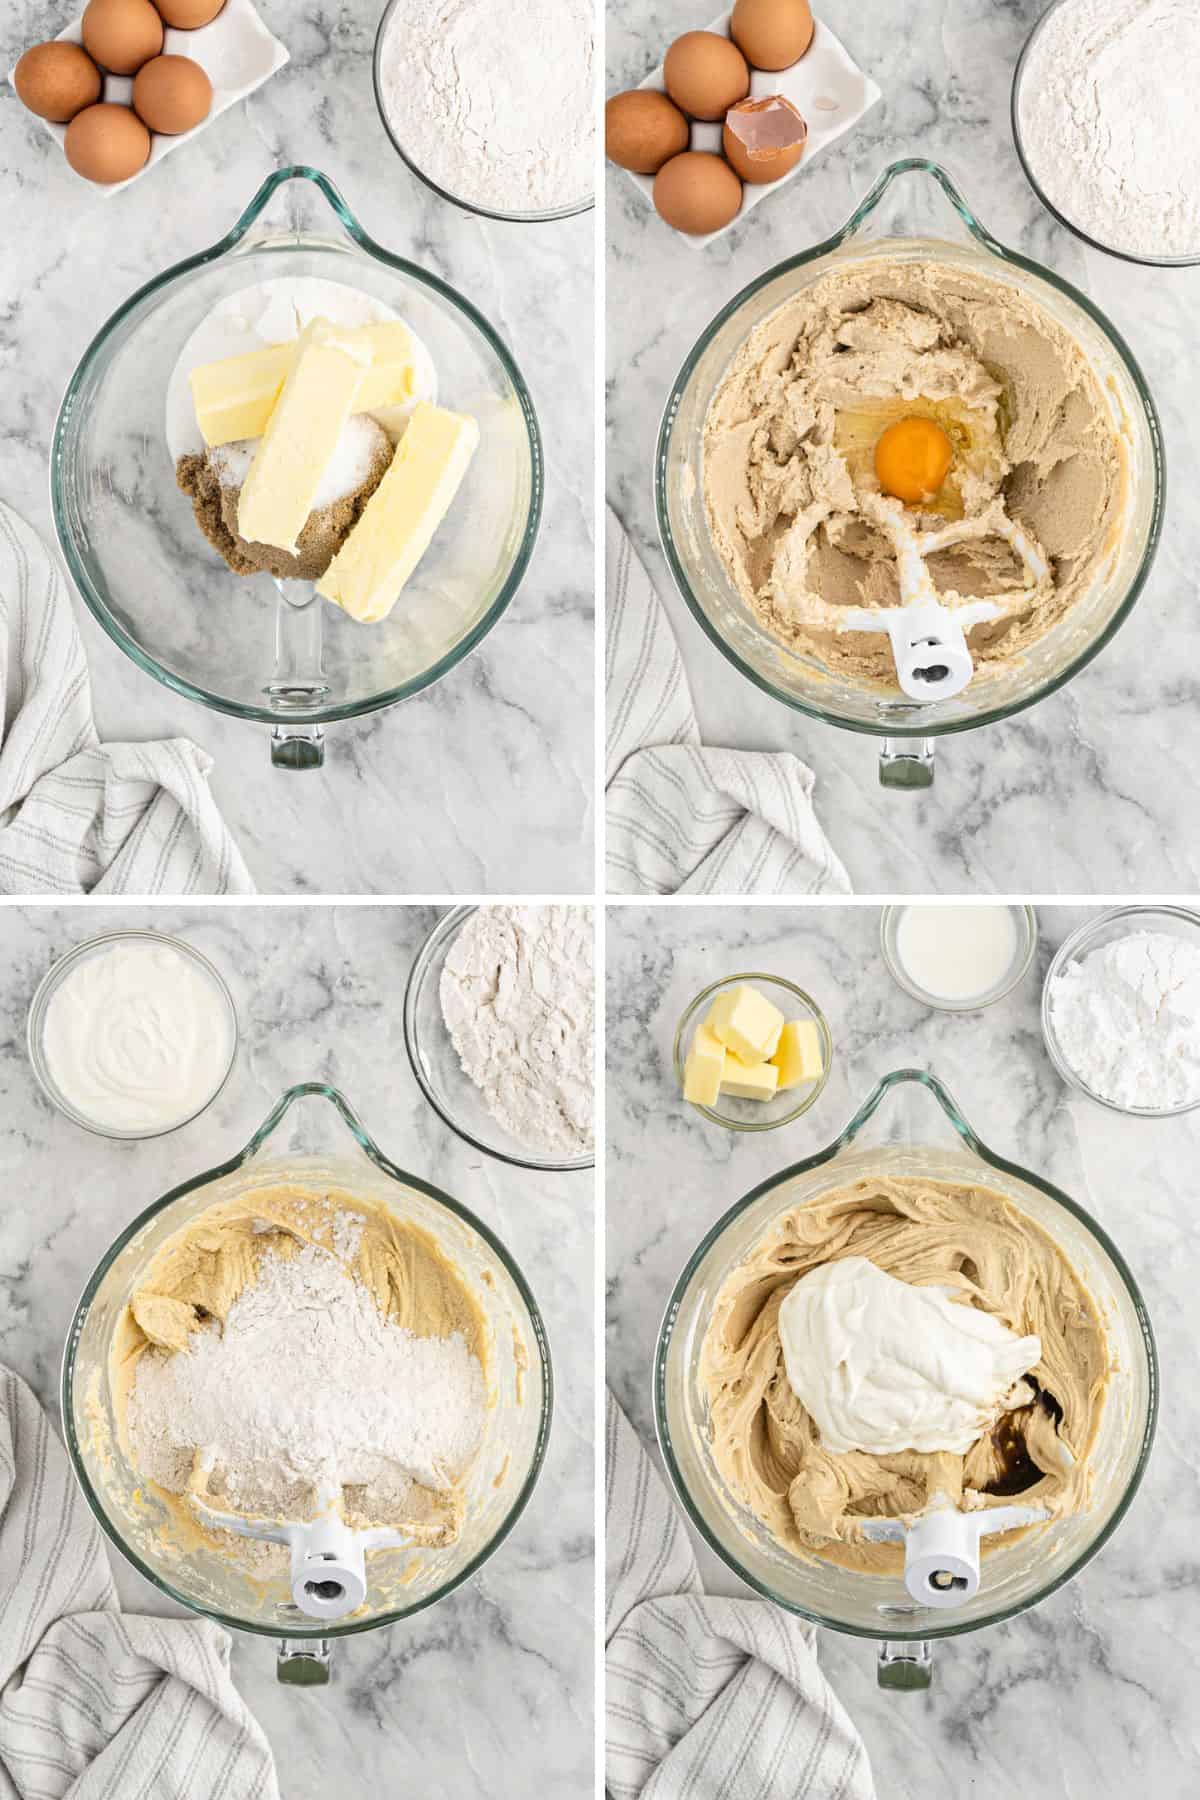 A collage of images showing the steps for mixing the cake batter.